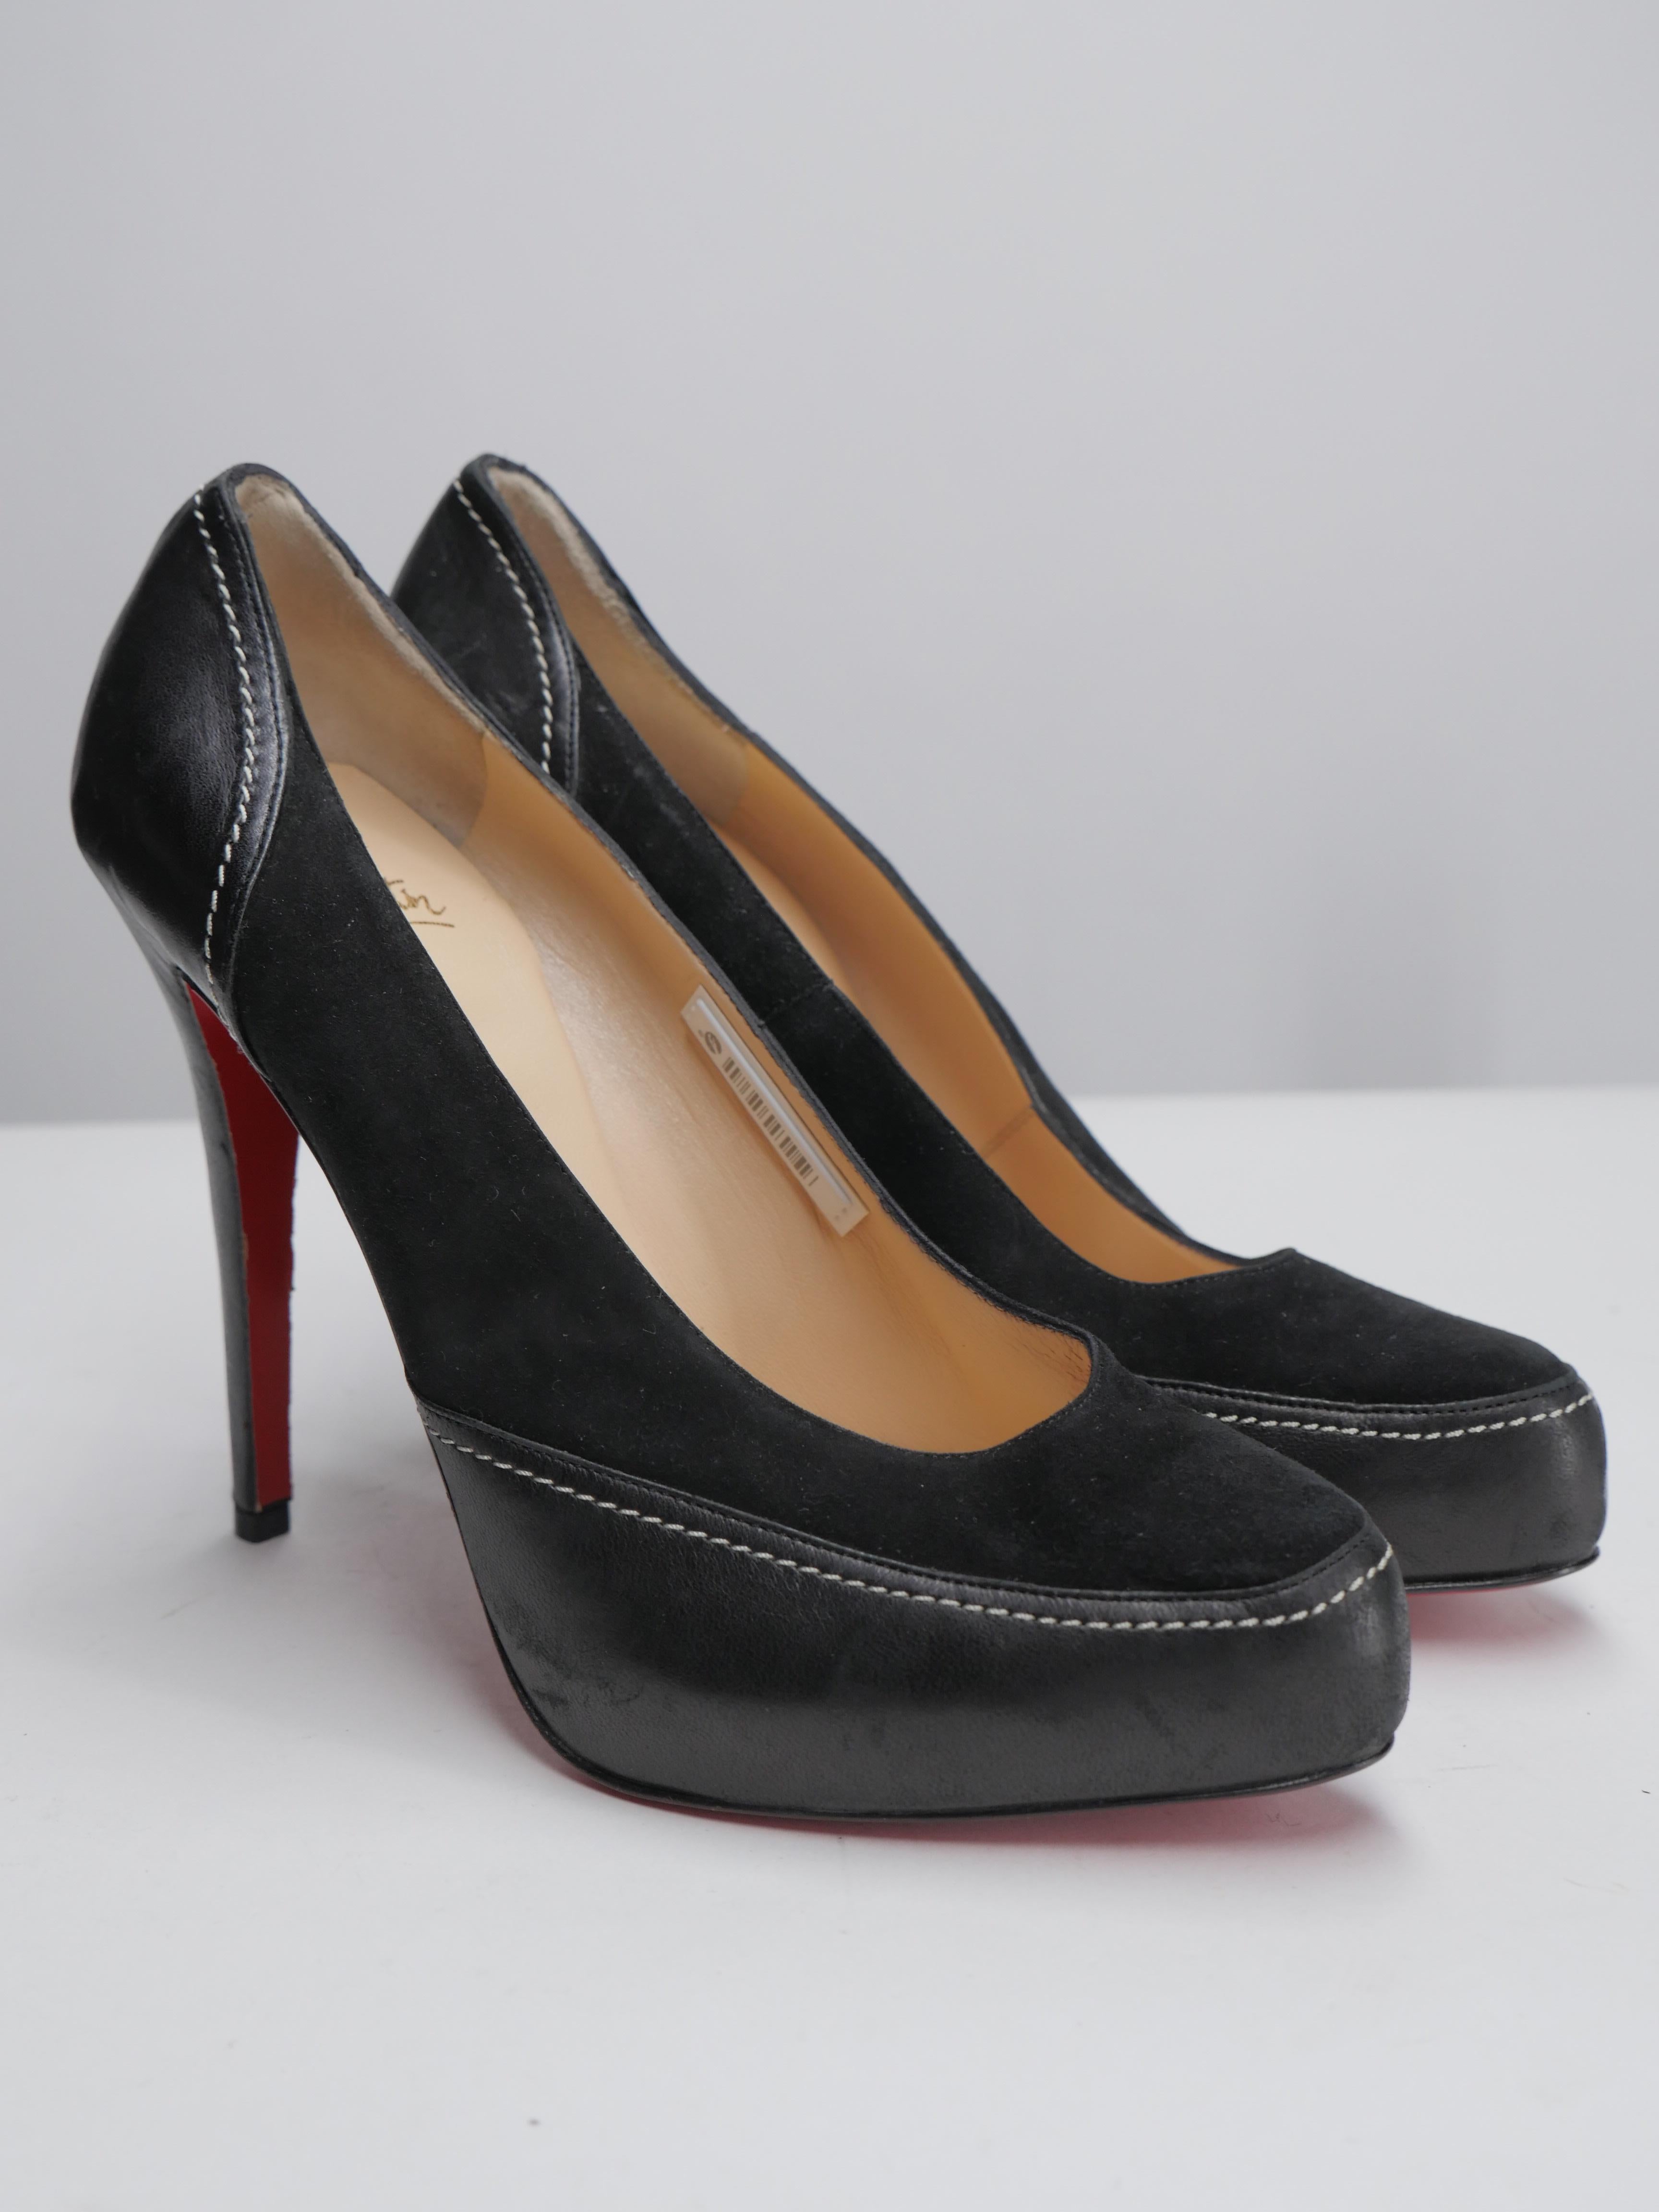 Women's or Men's Christian Louboutin  Size 41 Black Leather & Suede Pumps